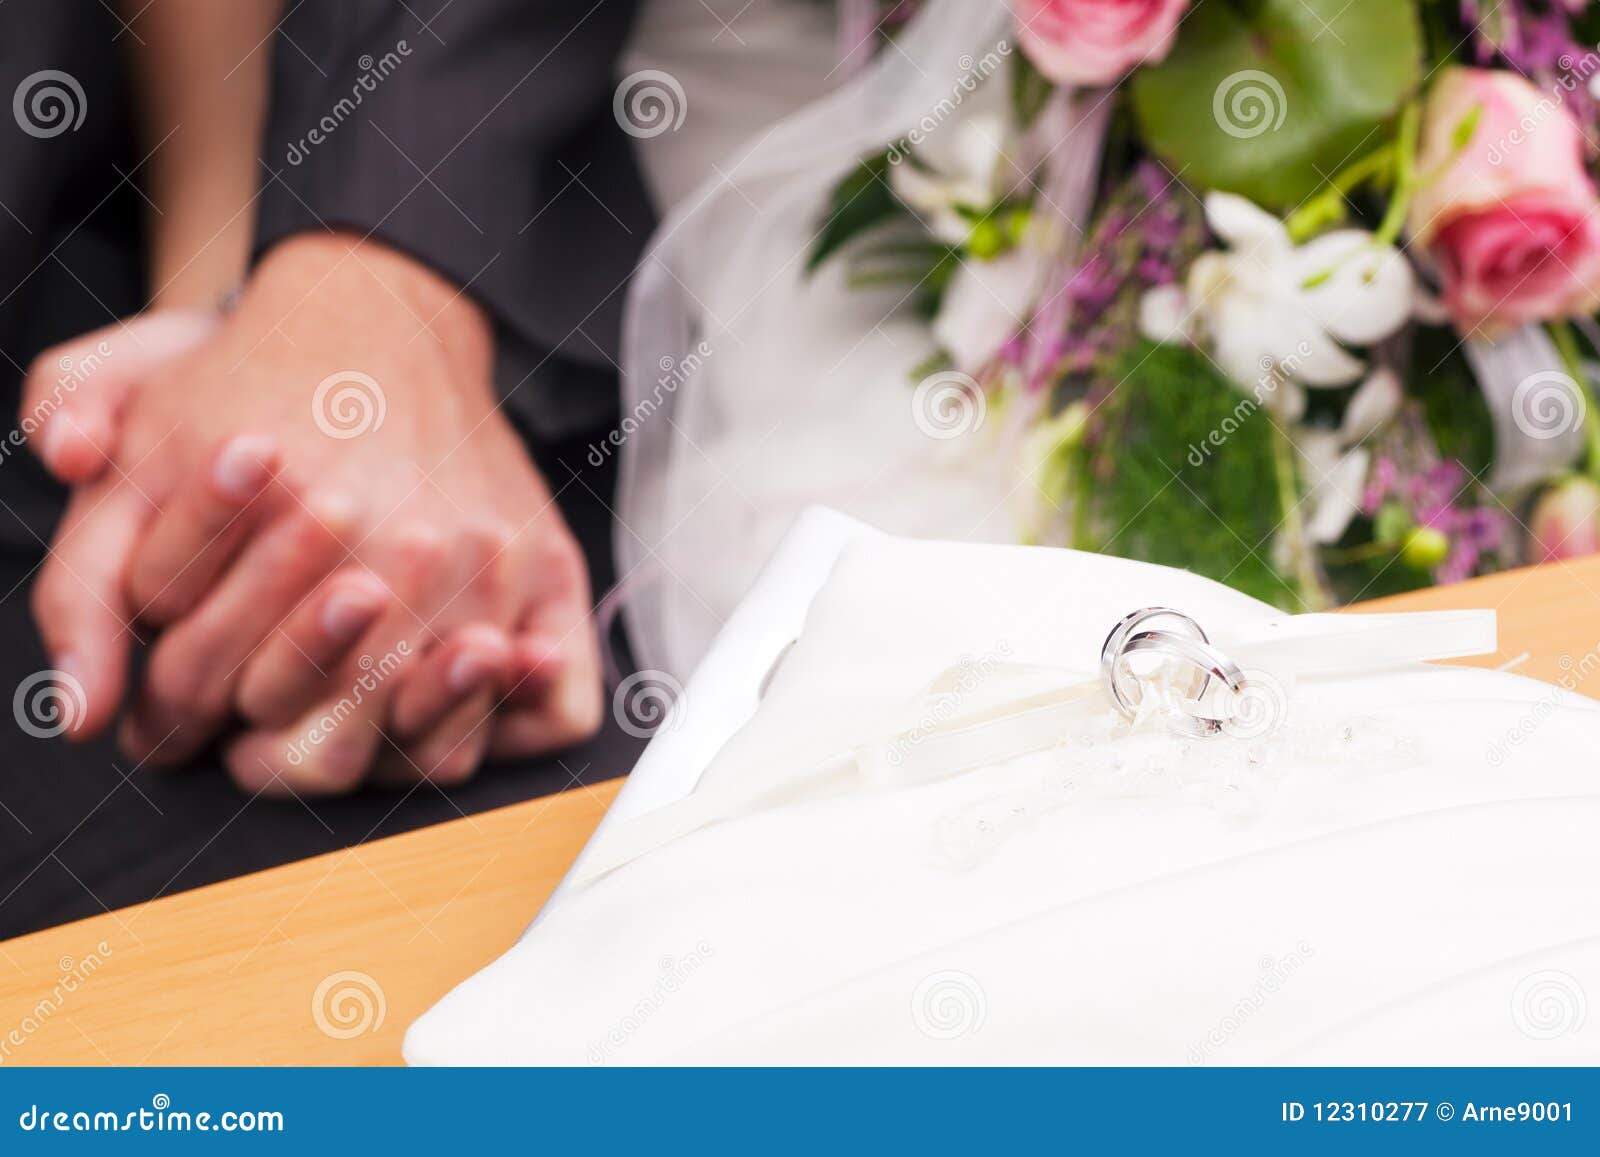 ... rings in front of the couple to be wed, picture of a wedding ceremony